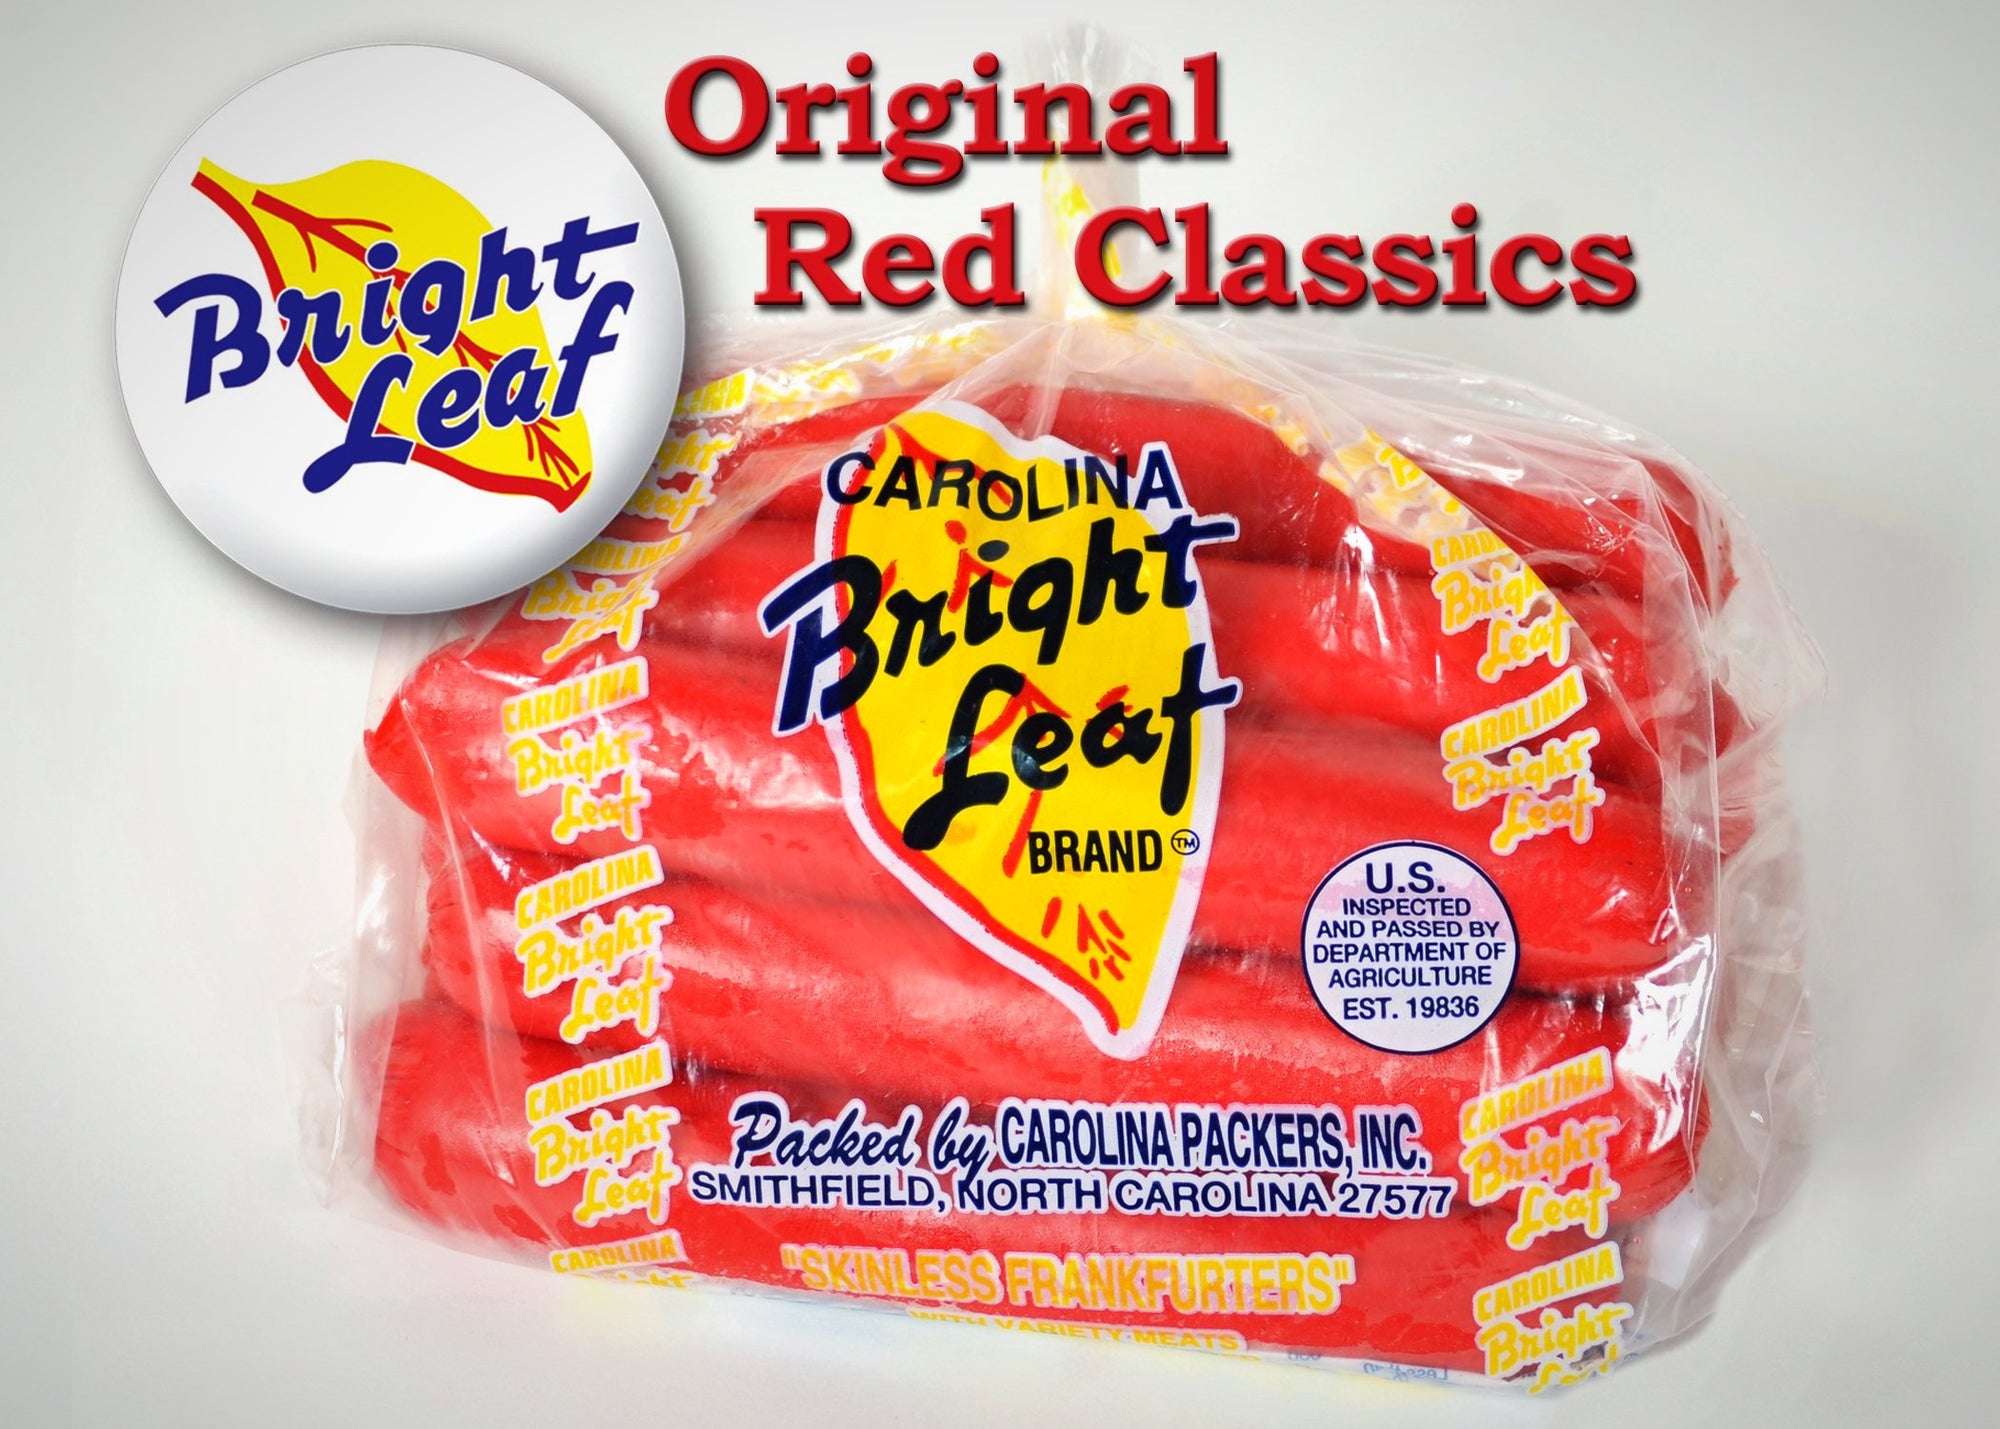 Bright Leaf Franks "Original Red Classic" (5 -1 lb Packages)